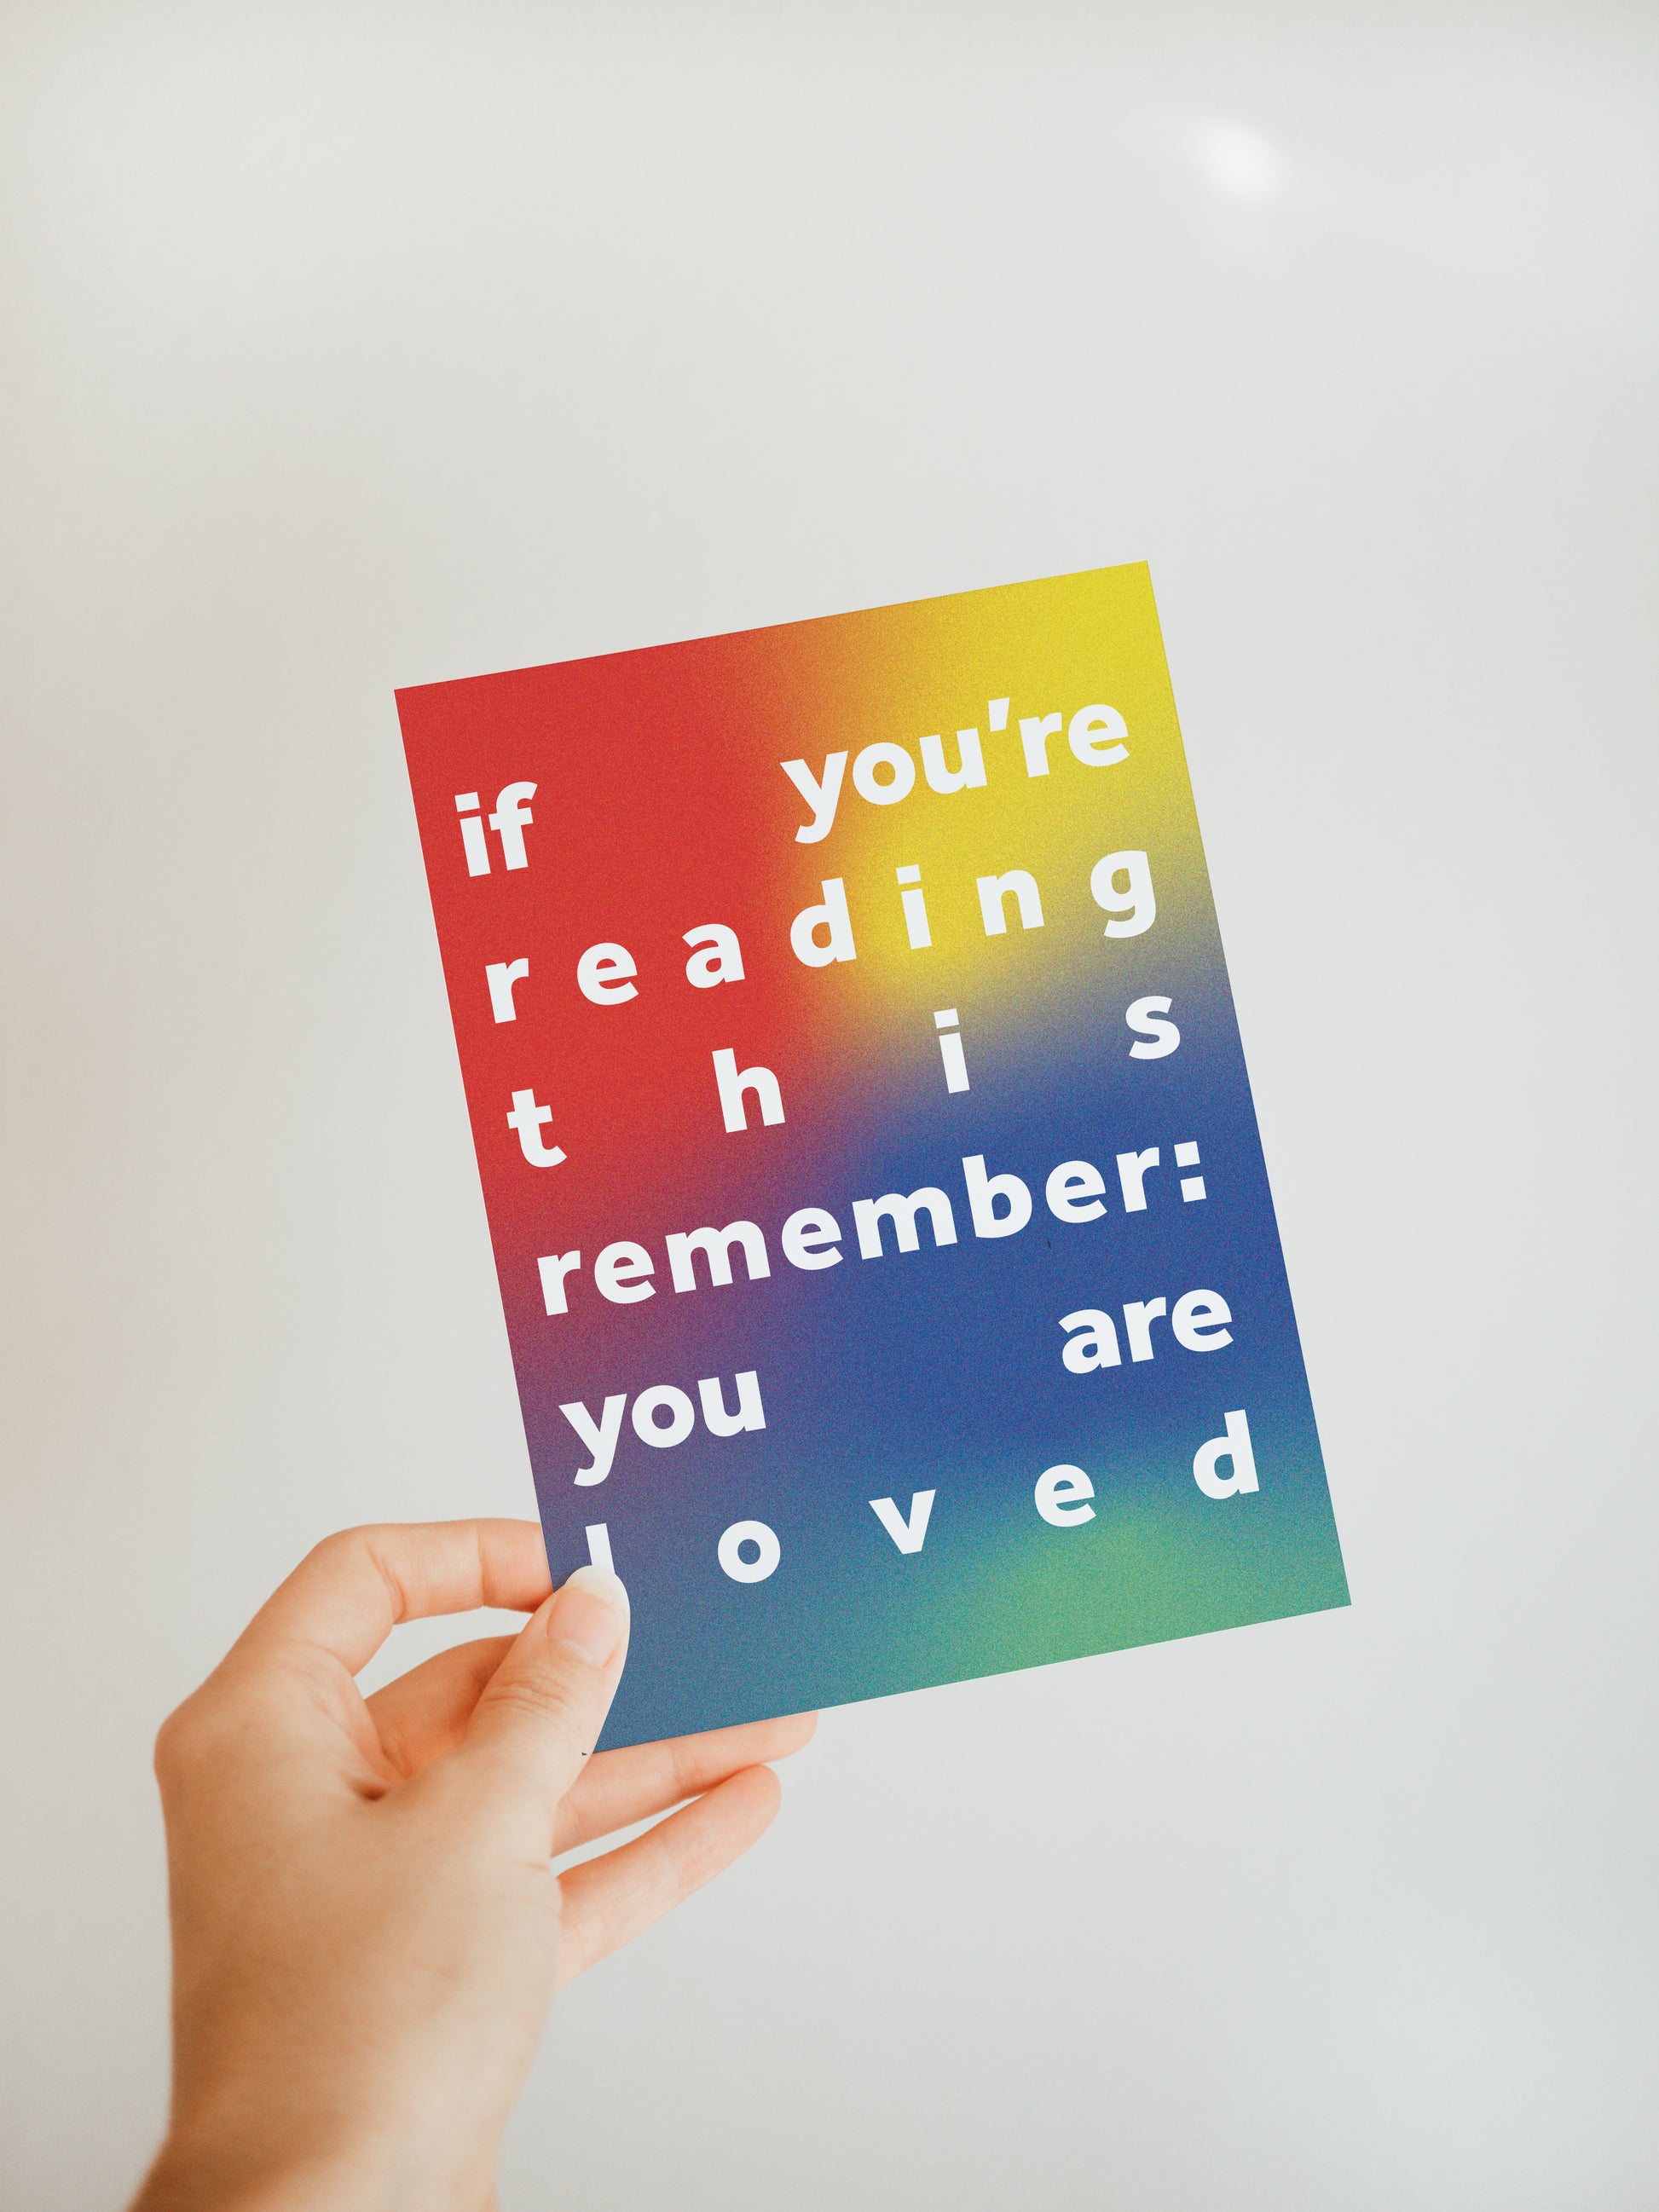 hand holding a multicolored greeting card that says "if you're reading this remember: you are loved" in white block letters